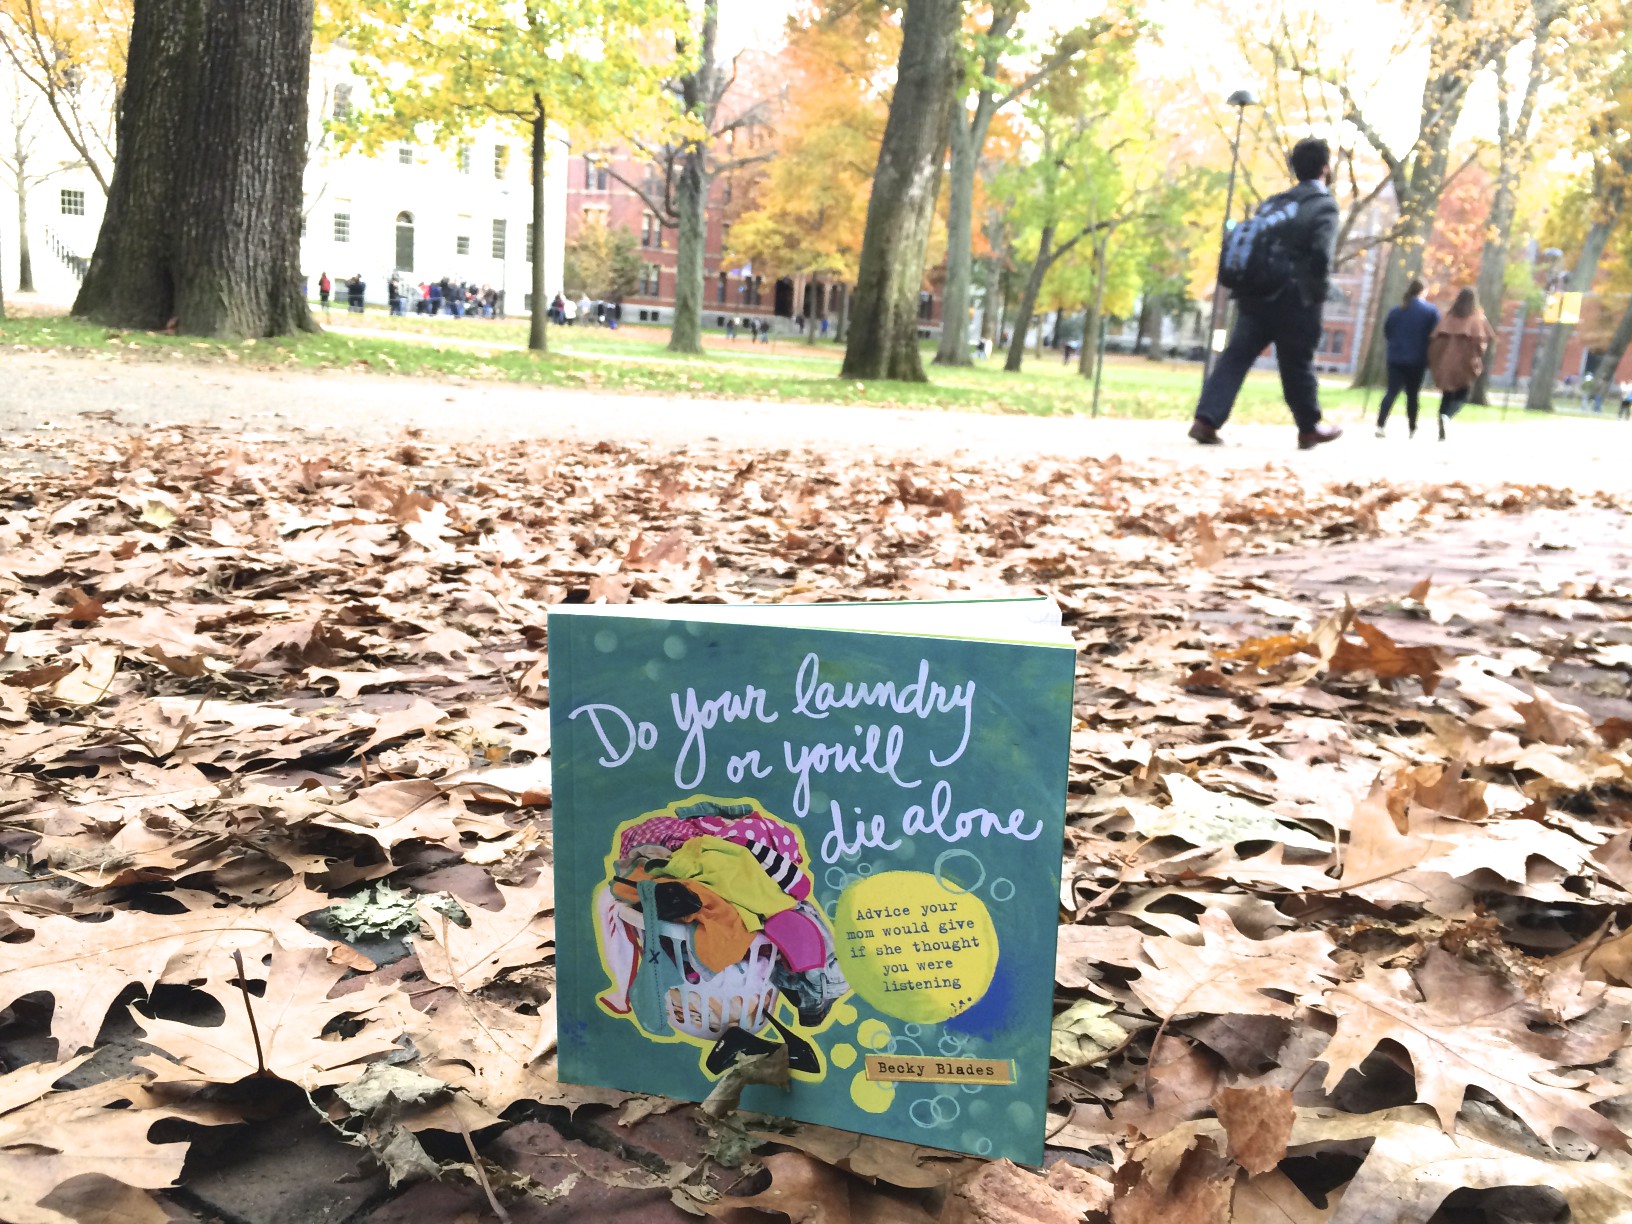  do your laundry or you'll die alone book on fall leaves in front of college campus